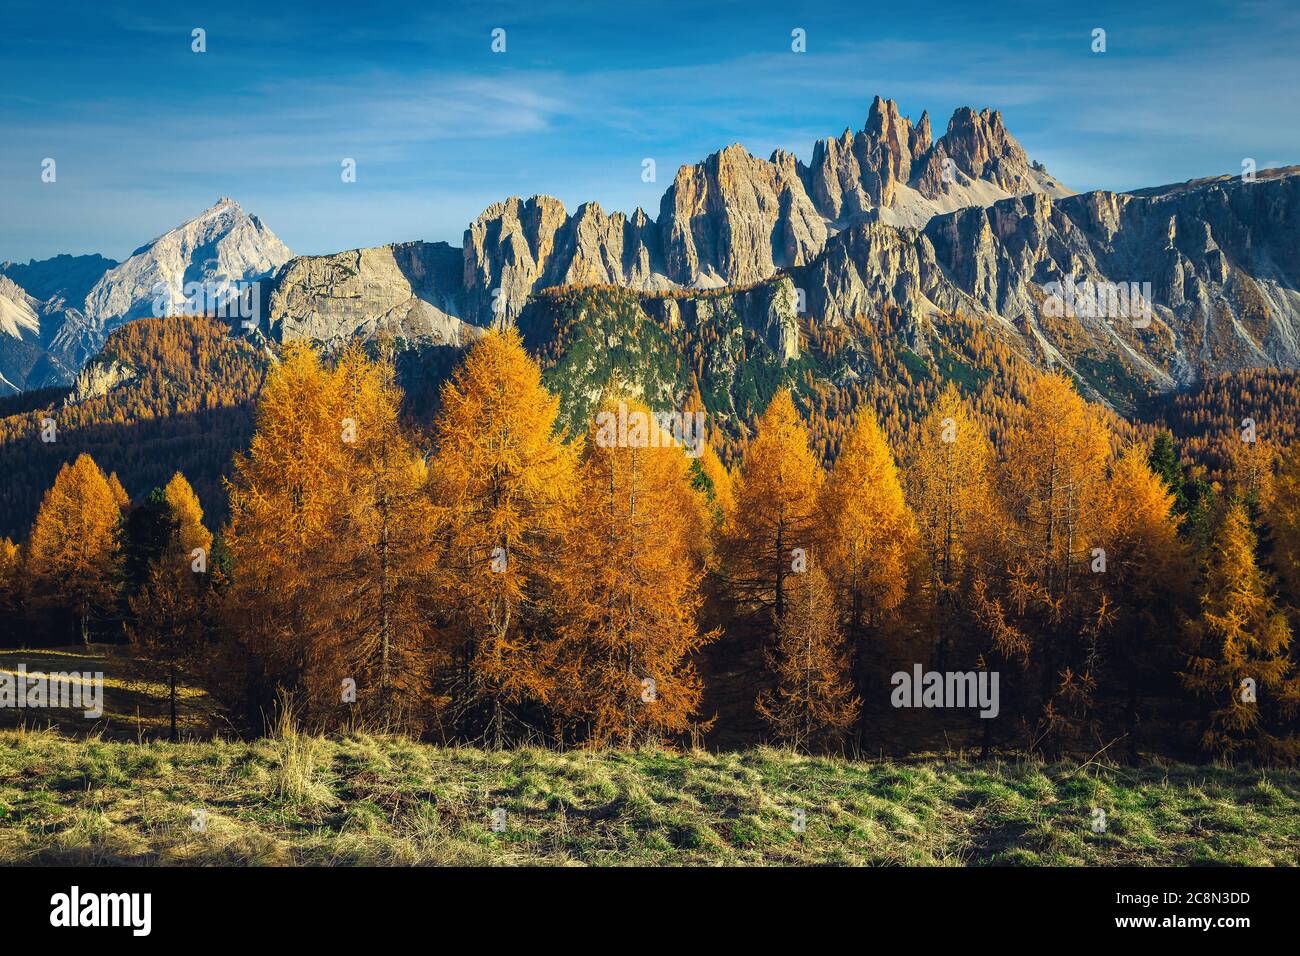 Admirable autumn alpine landscape with colorful larch forest and spectacular mountains in background, Dolomites, Italy, Europe Stock Photo